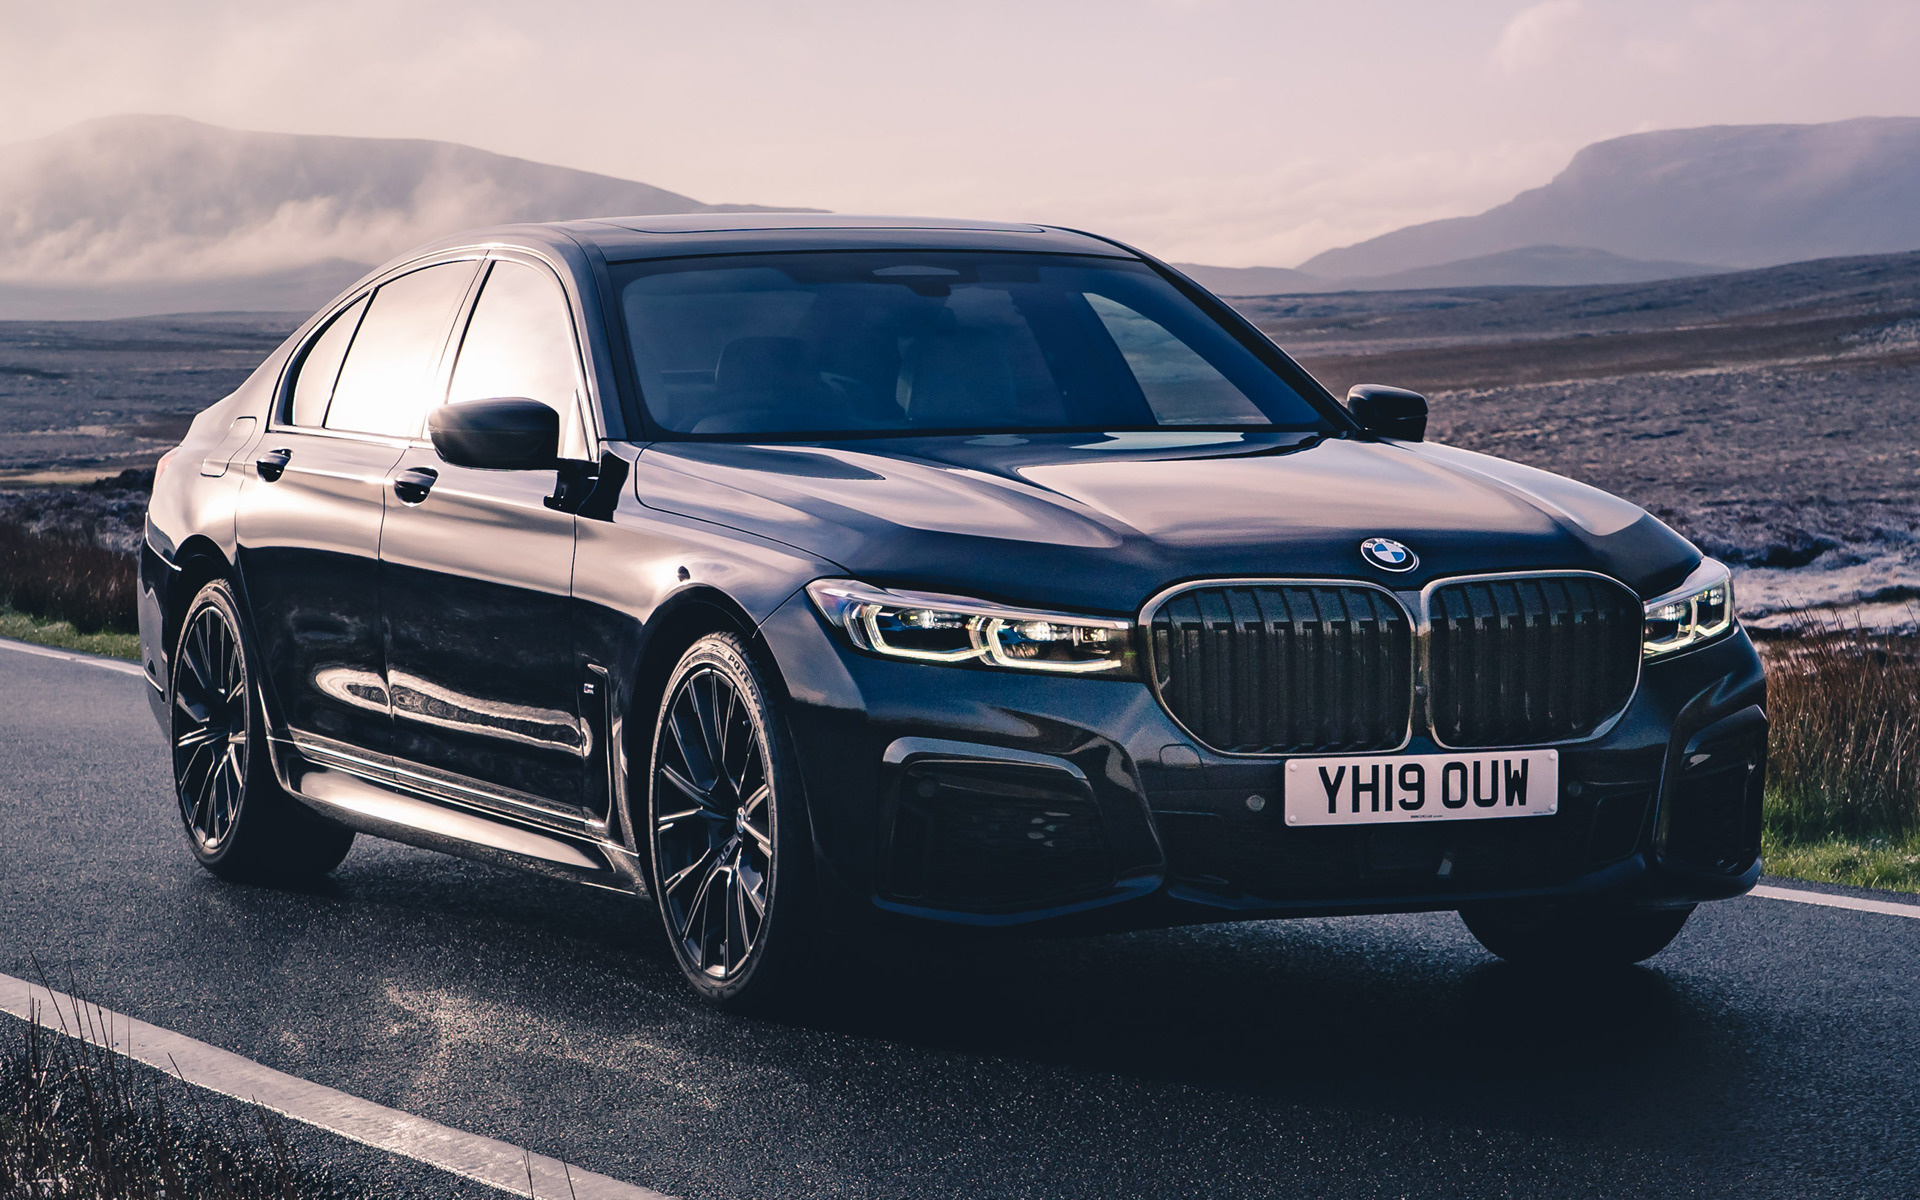 BMW 7 Series M Sport (UK) and HD Image